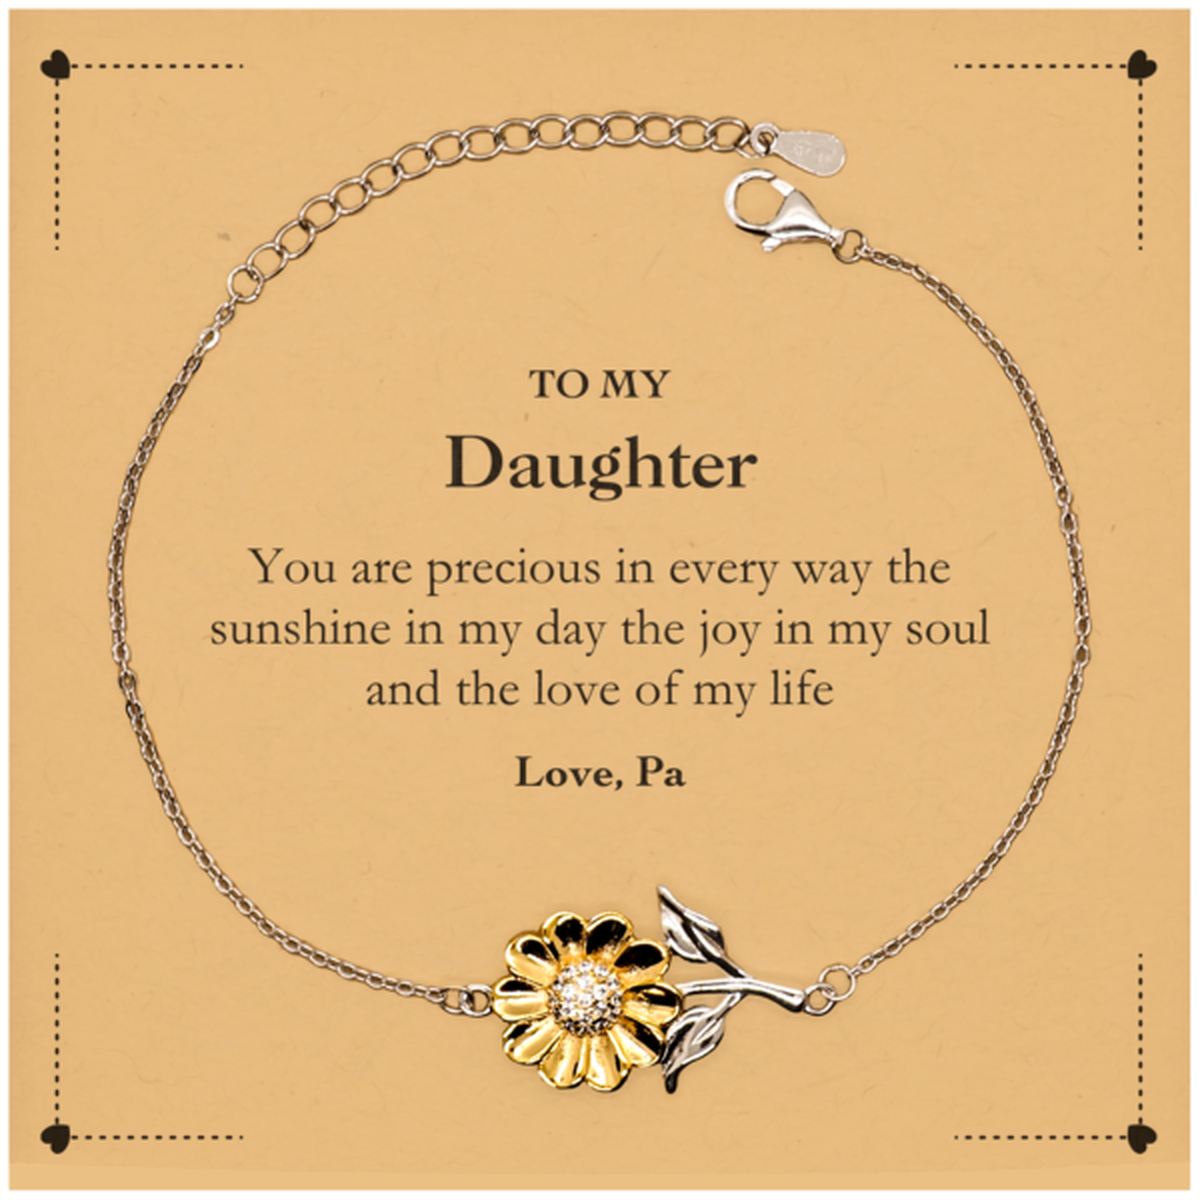 Graduation Gifts for Daughter Sunflower Bracelet Present from Pa, Christmas Daughter Birthday Gifts Daughter You are precious in every way the sunshine in my day. Love, Pa